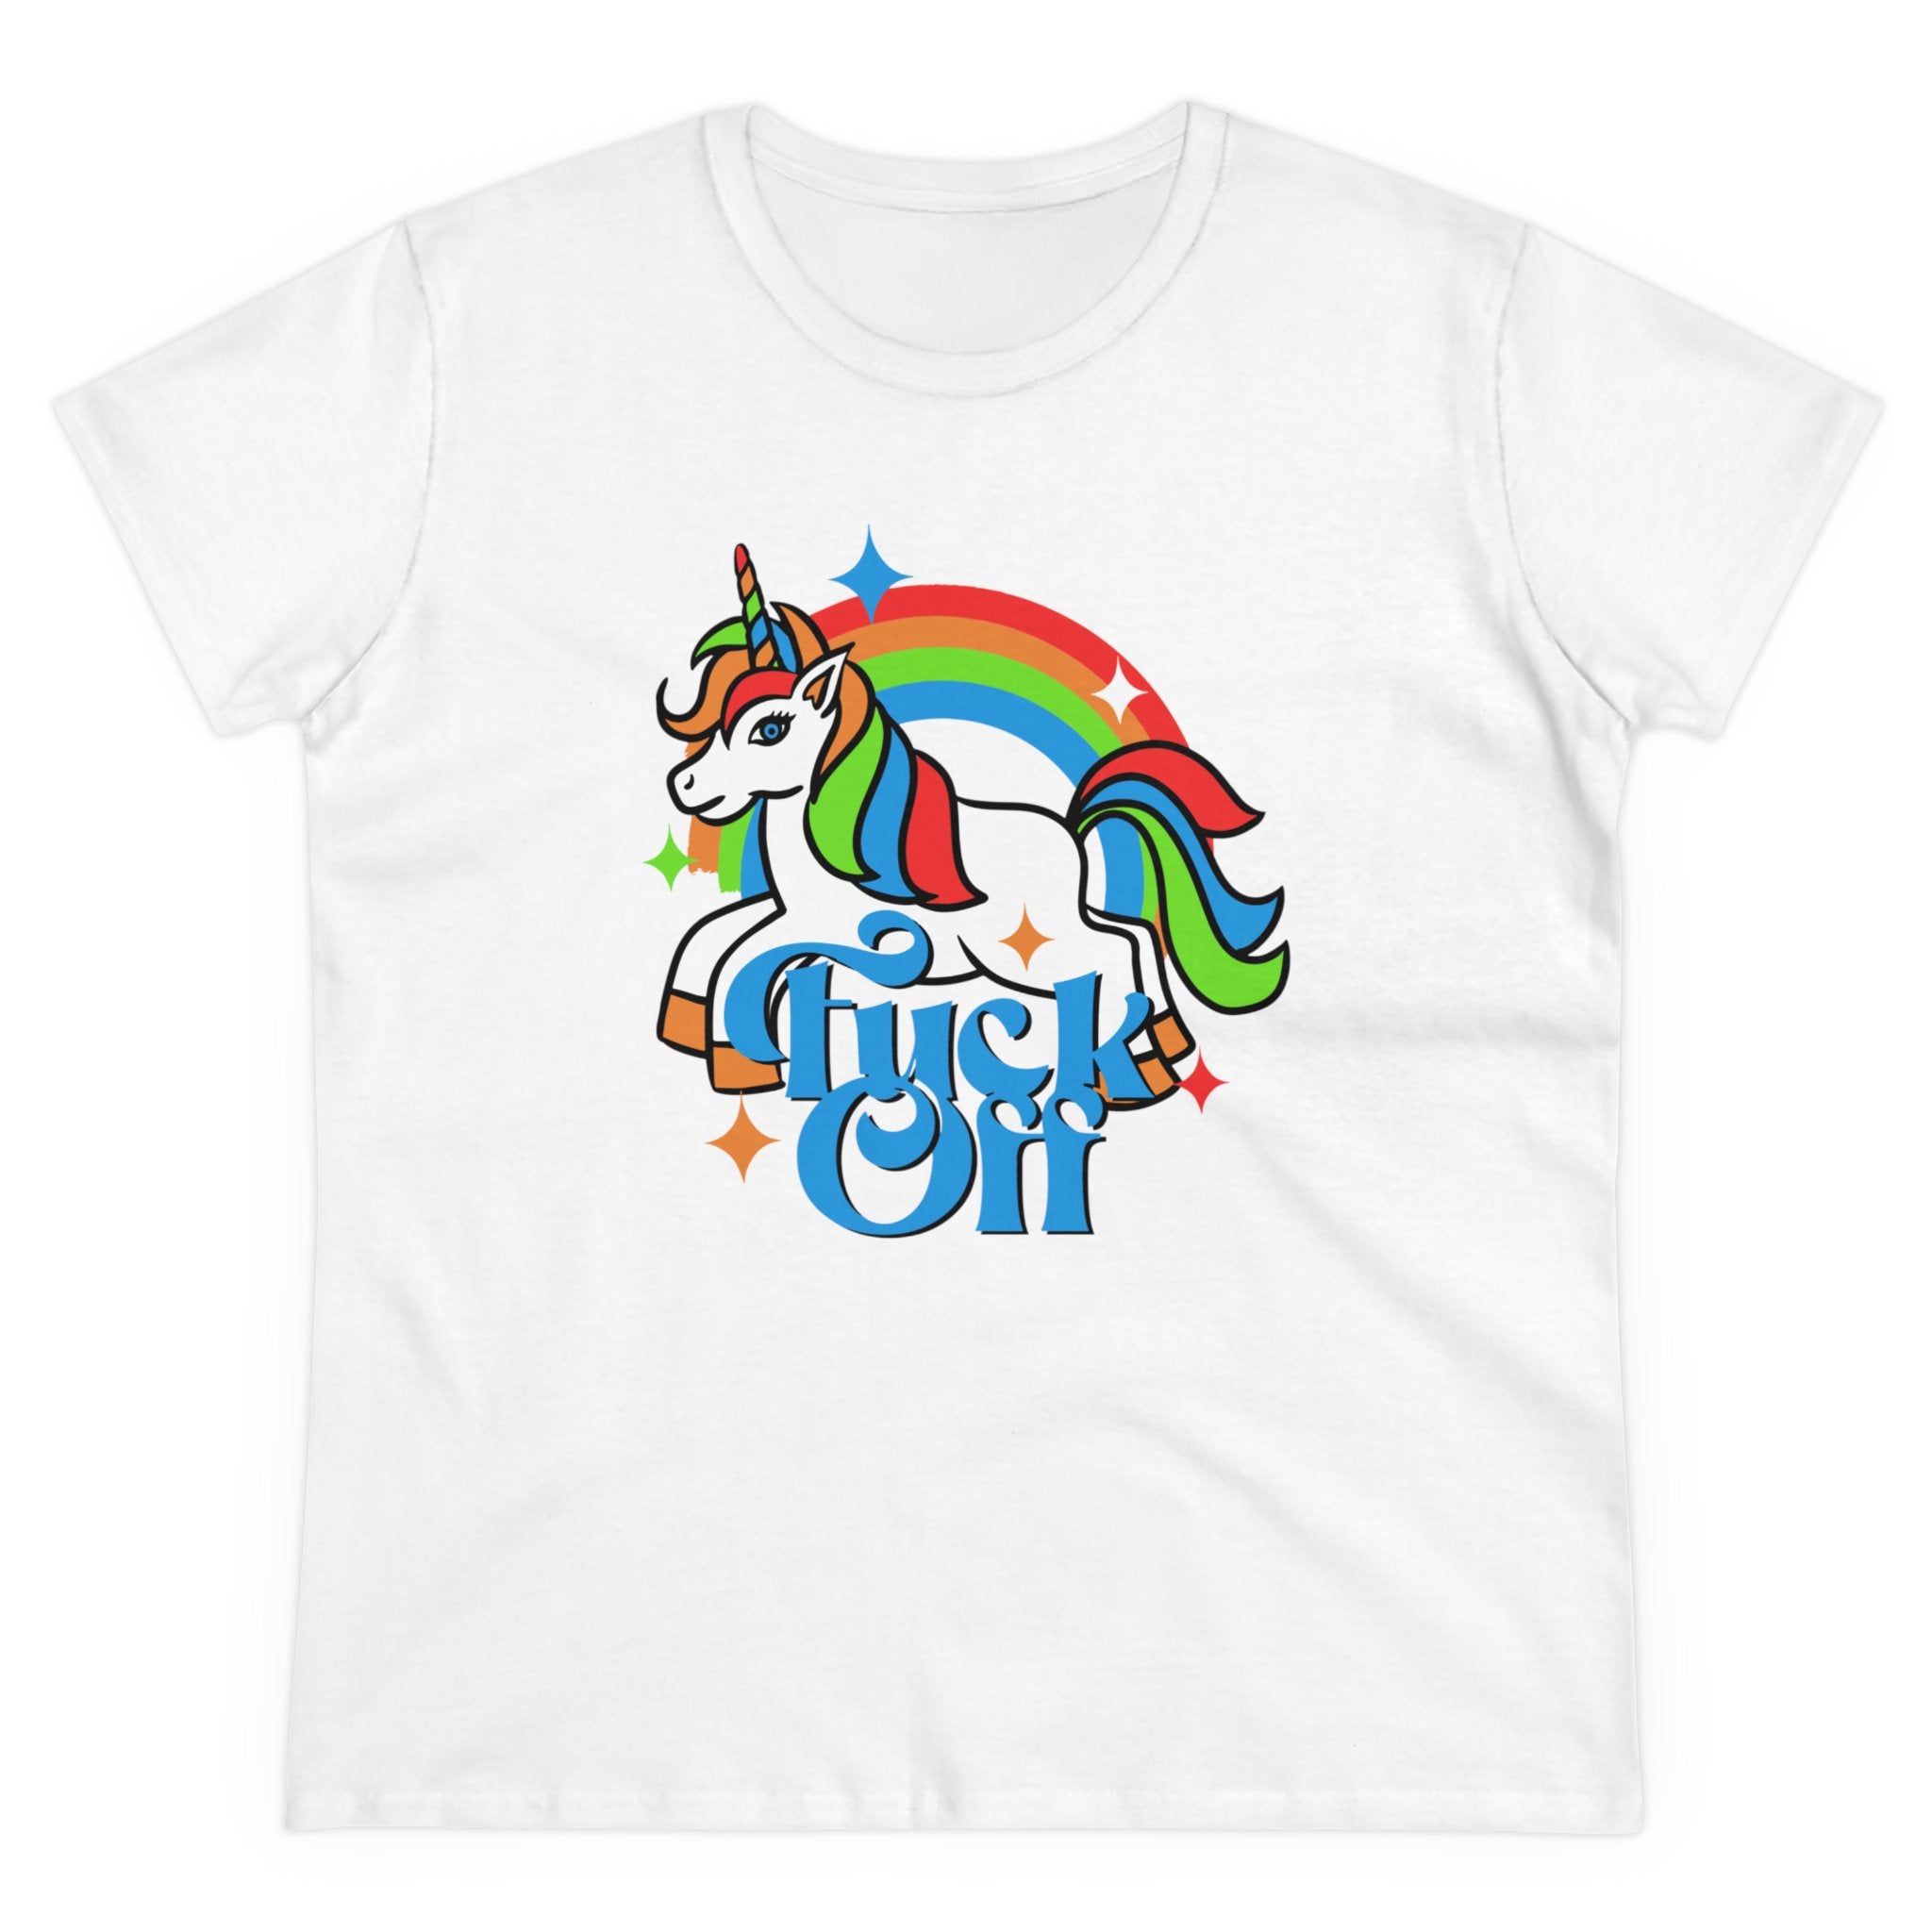 Discover our F Off - Women's Tee, a lightweight cotton white T-shirt featuring a colorful unicorn and rainbow design above the bold phrase "F* Off" in blue.